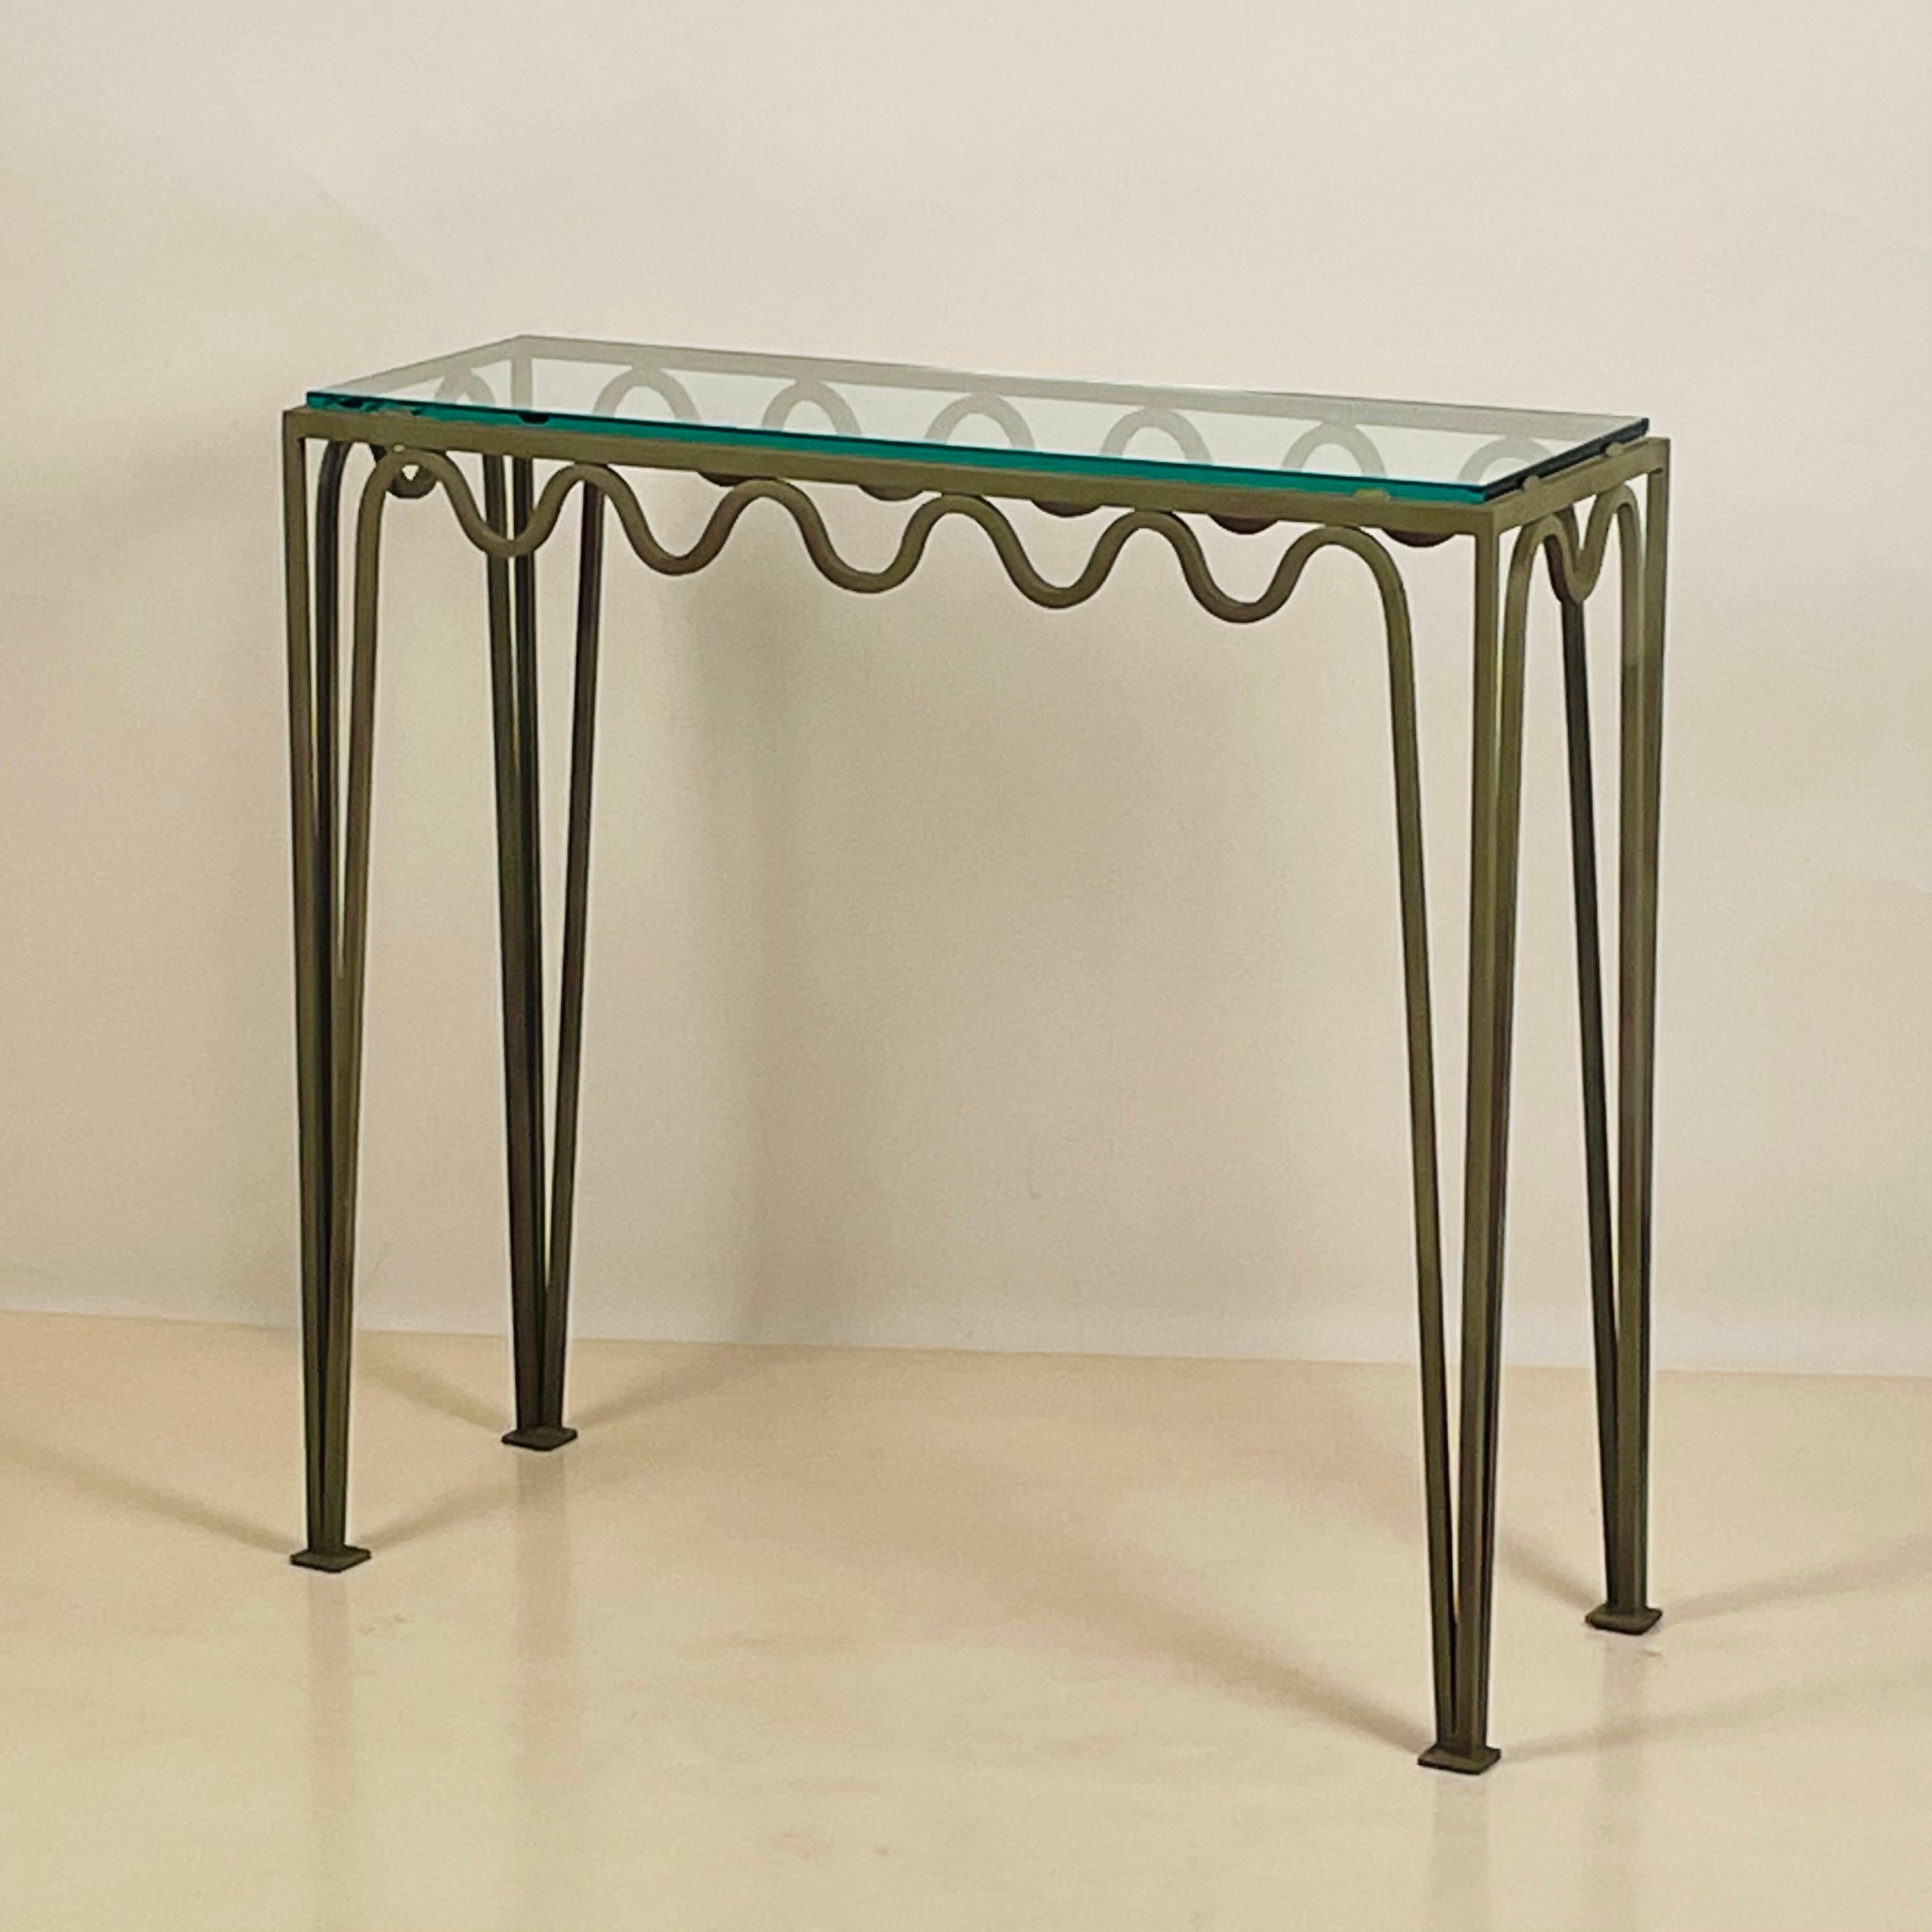 Pair of chic verdigris 'Meandre' and glass consoles by Design Frères.